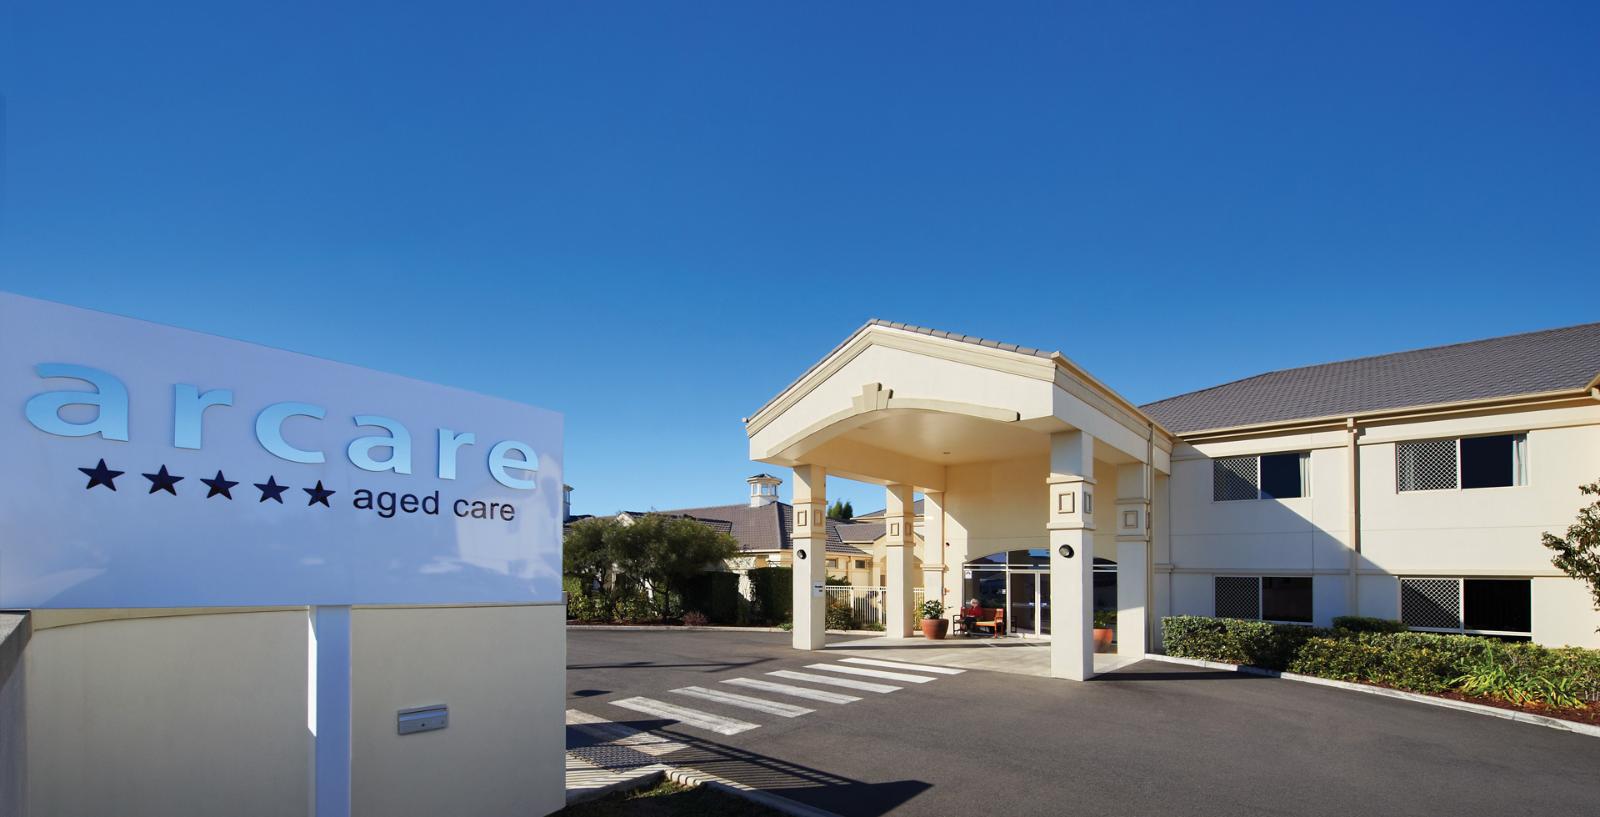 Arcare aged care eight mile plains exterior front entrance sign 01